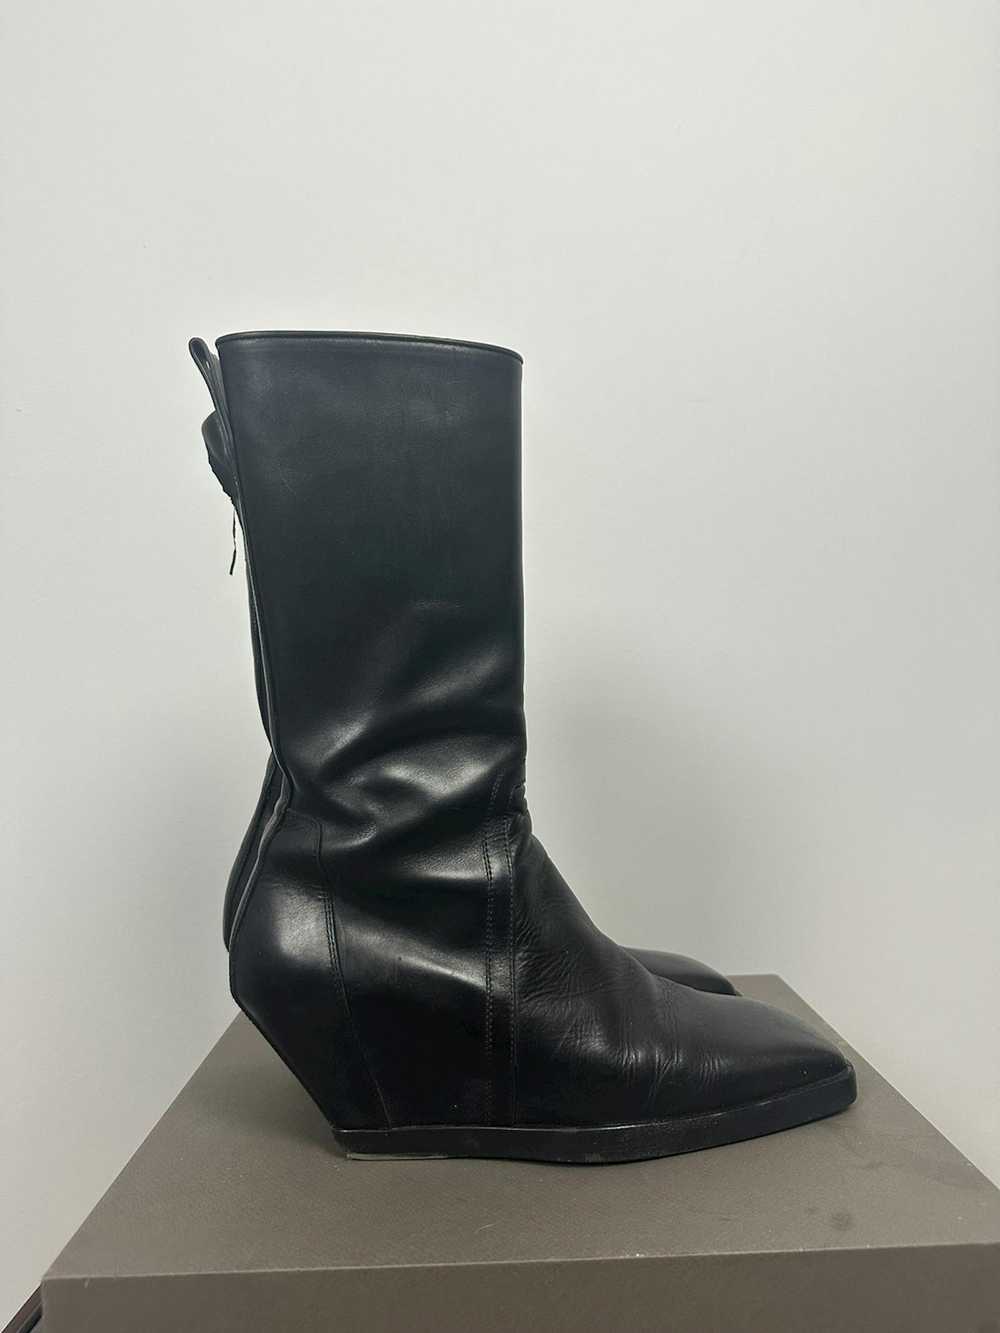 Rick Owens SS19 ‘BABEL’ Square Toe Wedge Boots - image 6